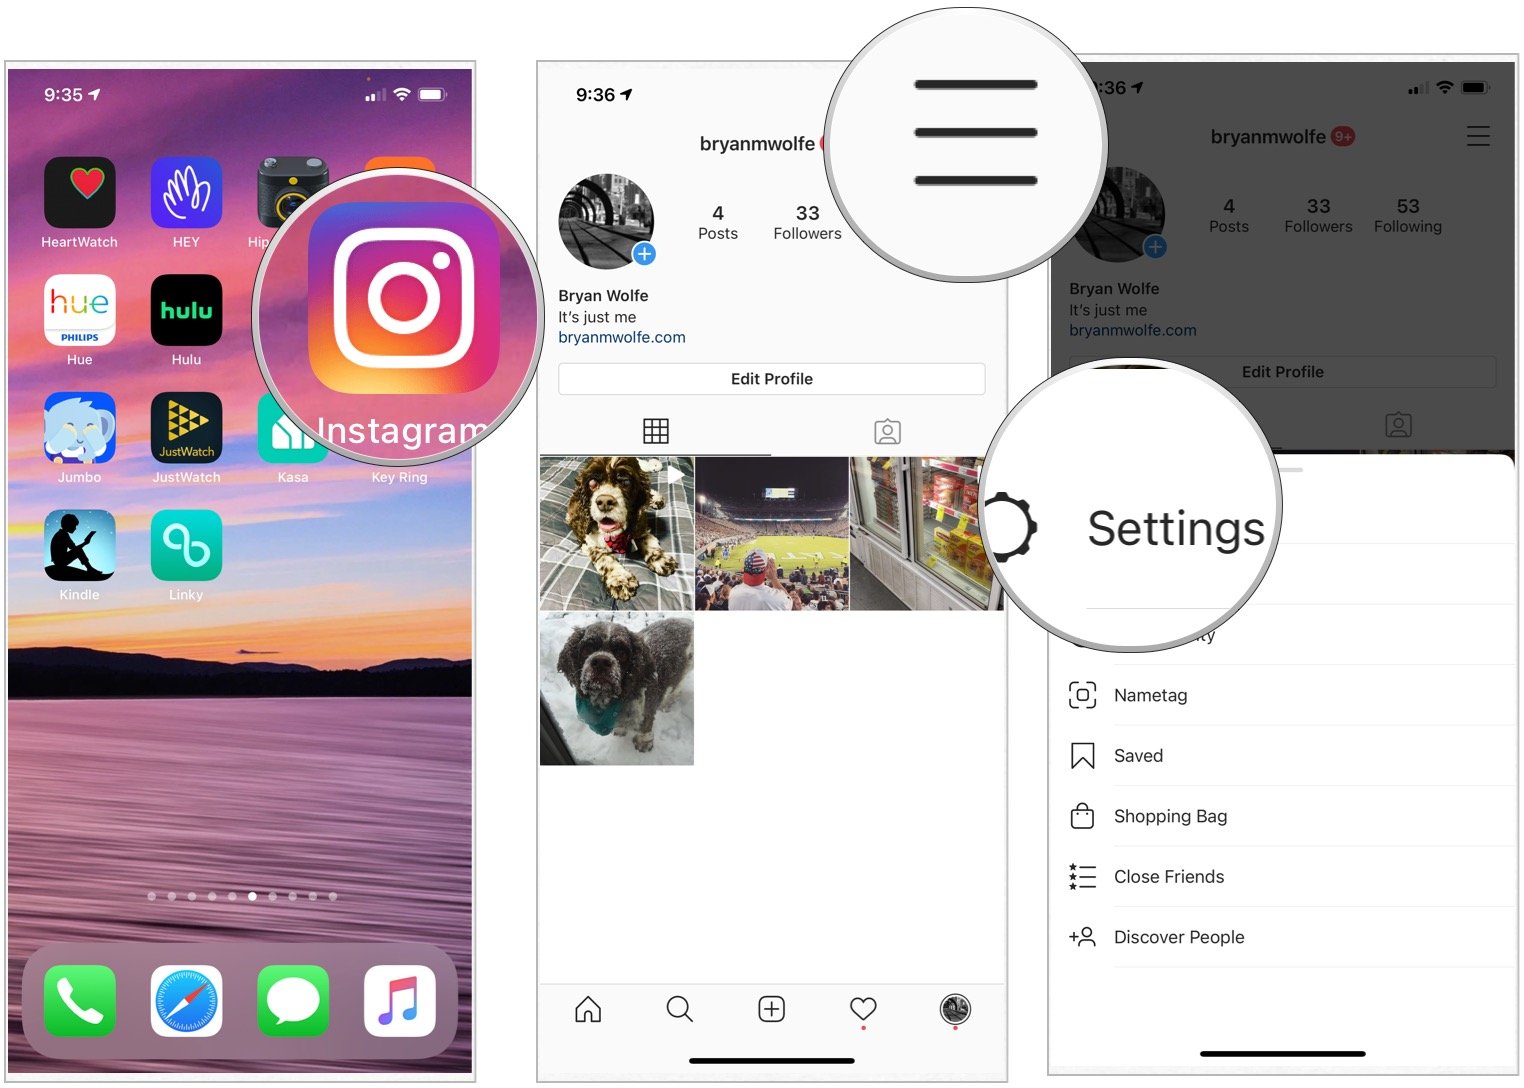 To set up two-factor authentication for Instagram, tap the Instagram app on your iPhone Home screen, then choose the menu icon at the top right of the Instagram Profile page. From there, select Settings on the menu. 